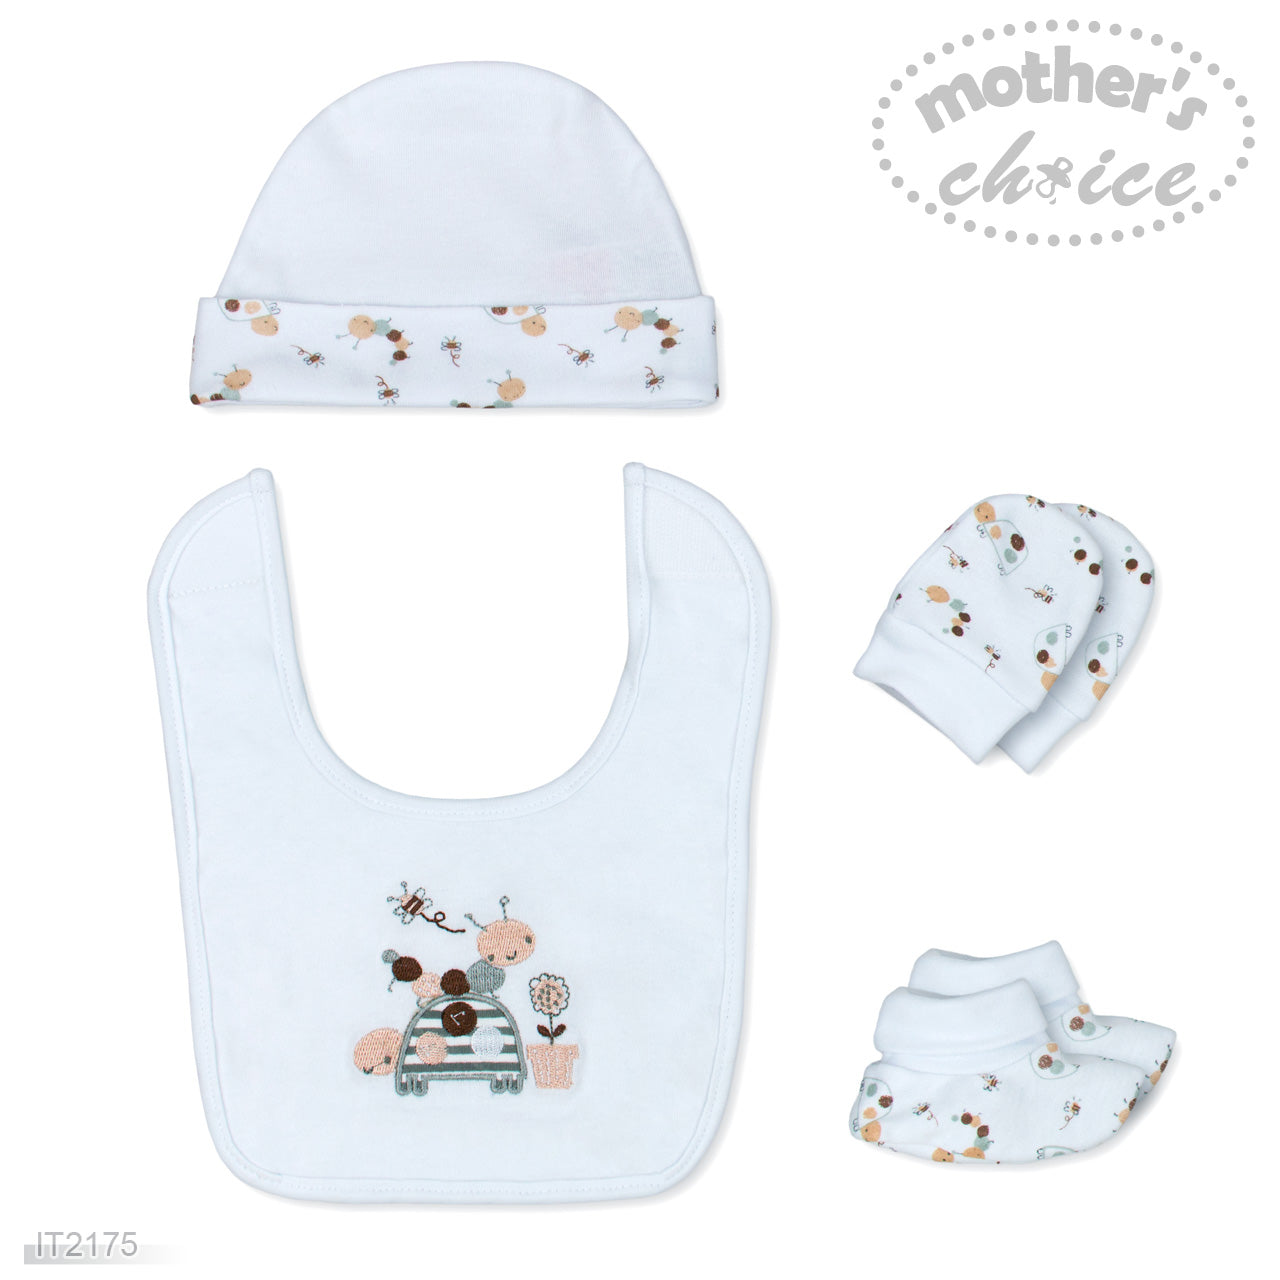 Mother's Choice Infant 4 Pack Layette Gift Set (Little Bee-IT2175)